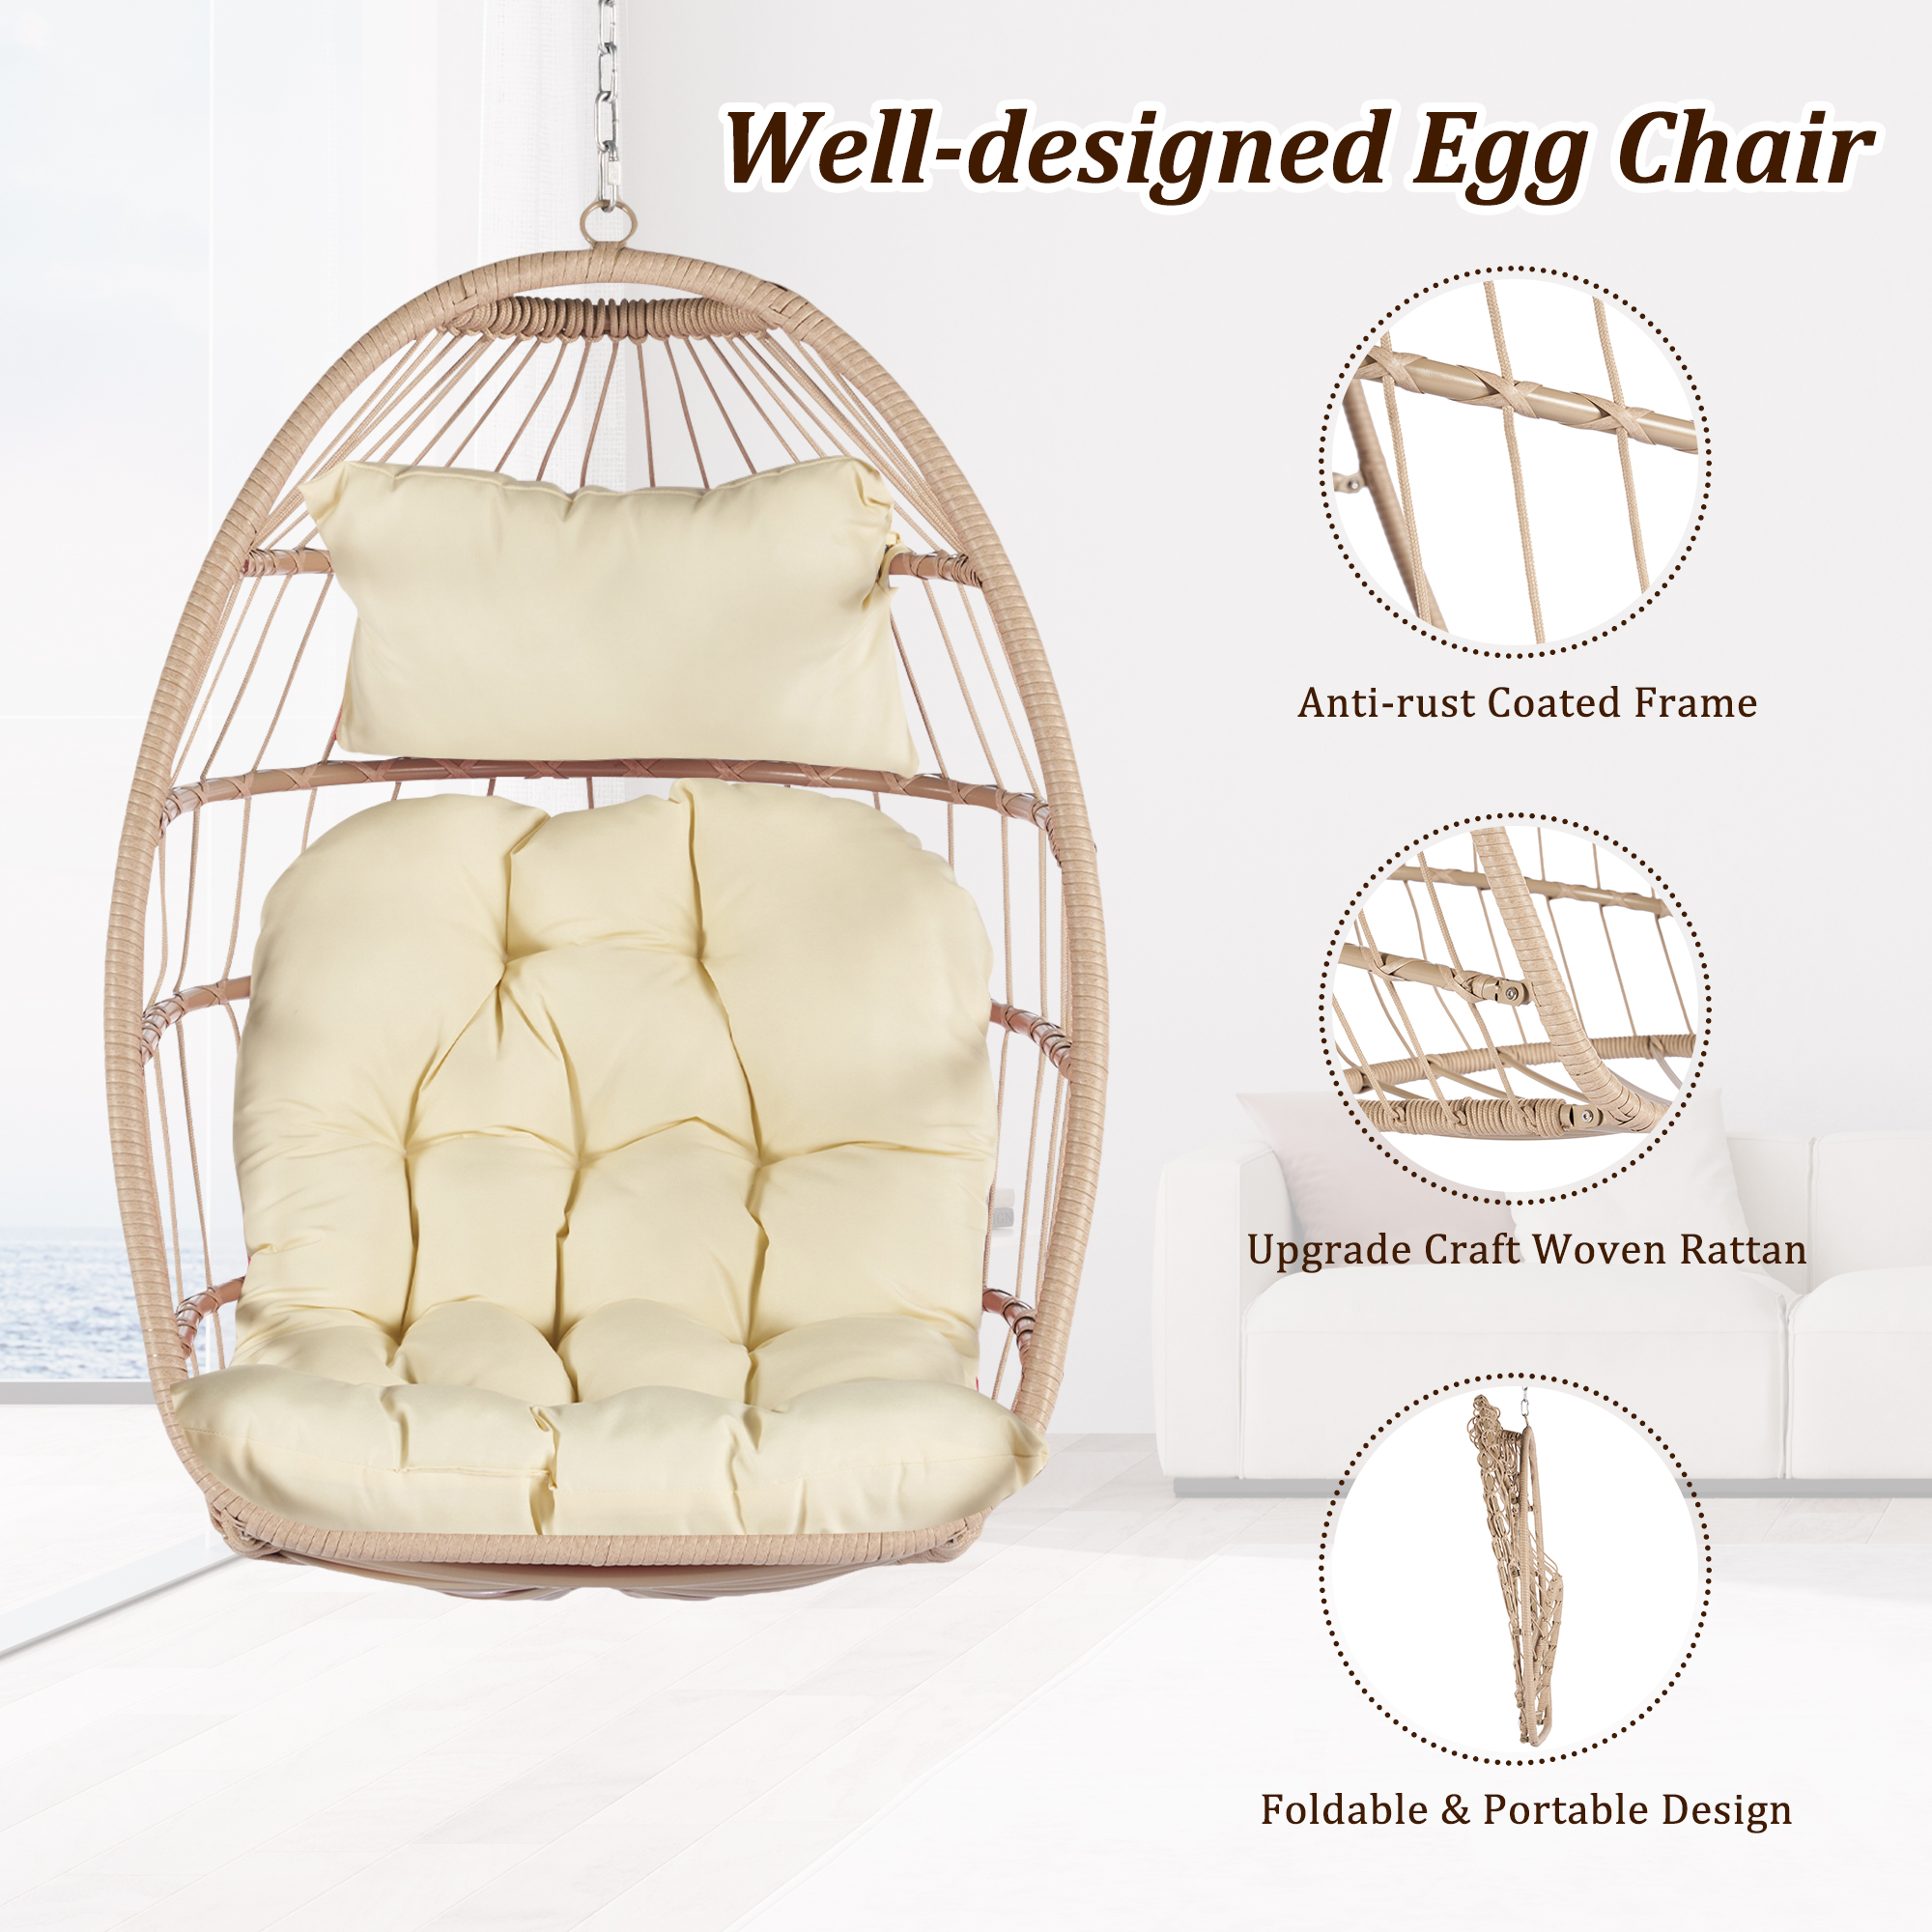 Patio Wicker Hanging Chair, Egg Chair Hammock Chair with UV Resistant Cushion and Pillow for Indoor Outdoor, Patio Backyard Balcony Lounge Rattan Swing Chair - image 5 of 7